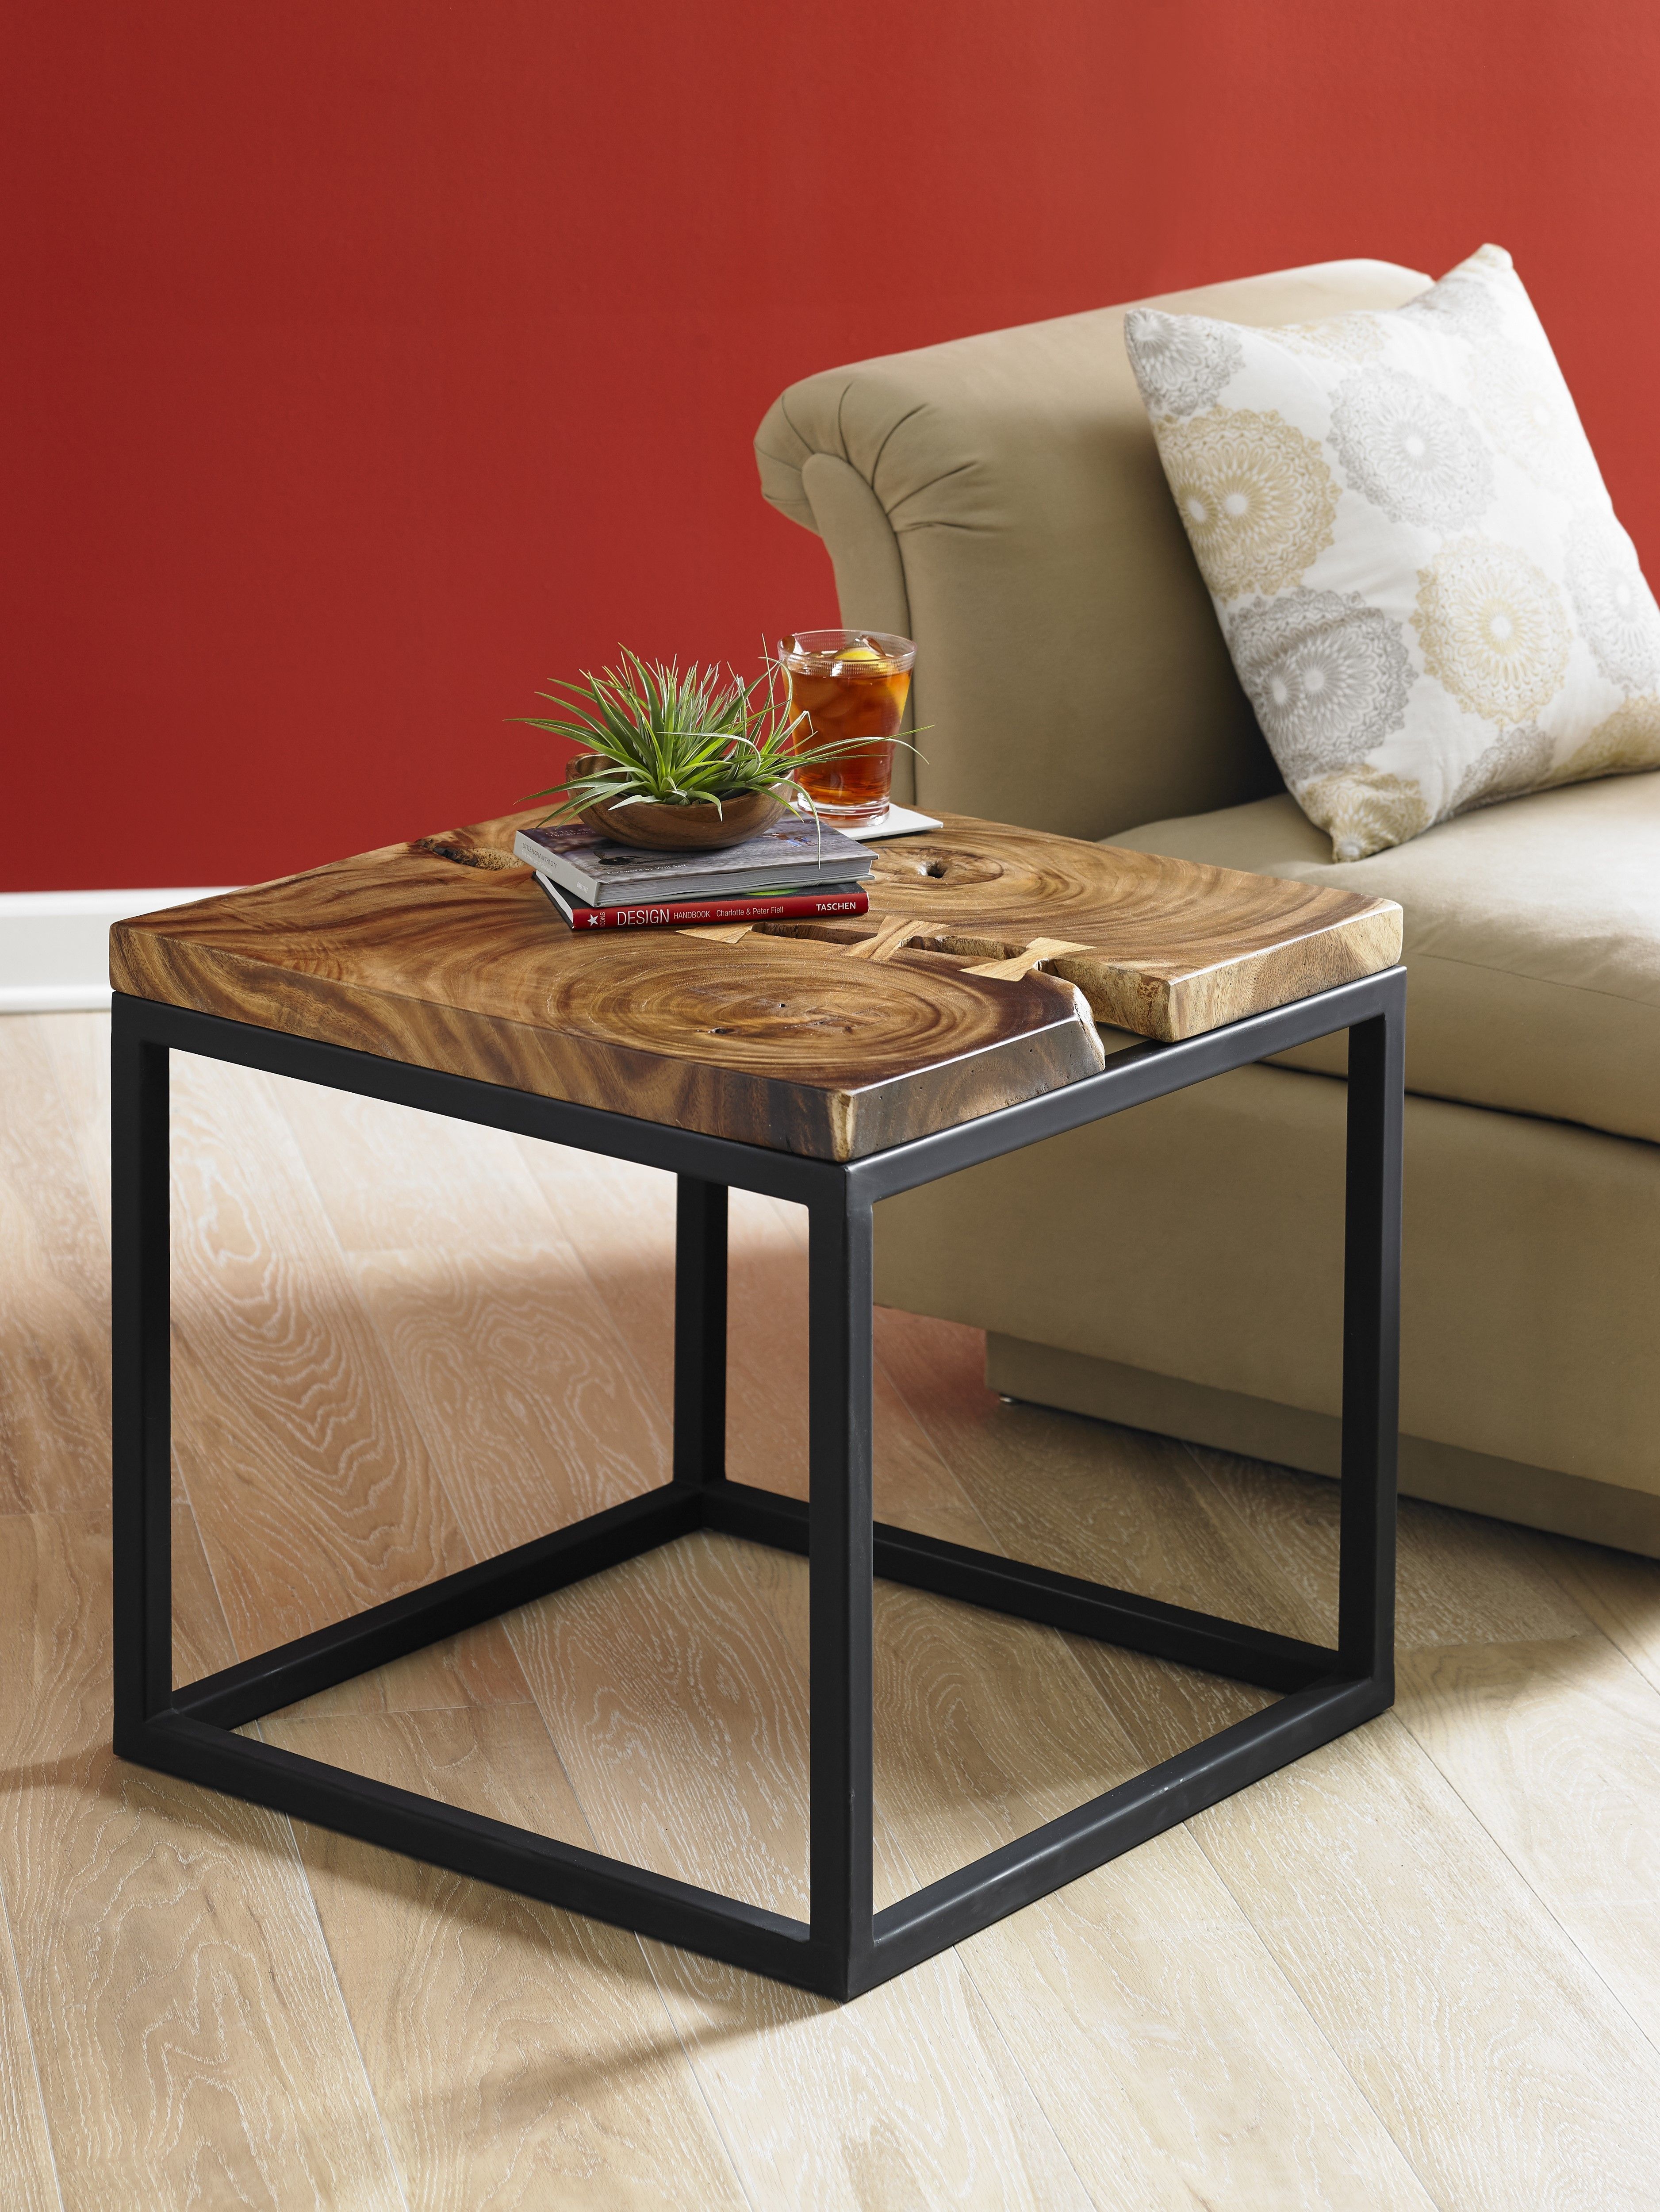 the martin side table displays stunning chamcha wood metal base furniture accent juxtaposition elements highlights woods natural characteristics occasional tables drum throne for